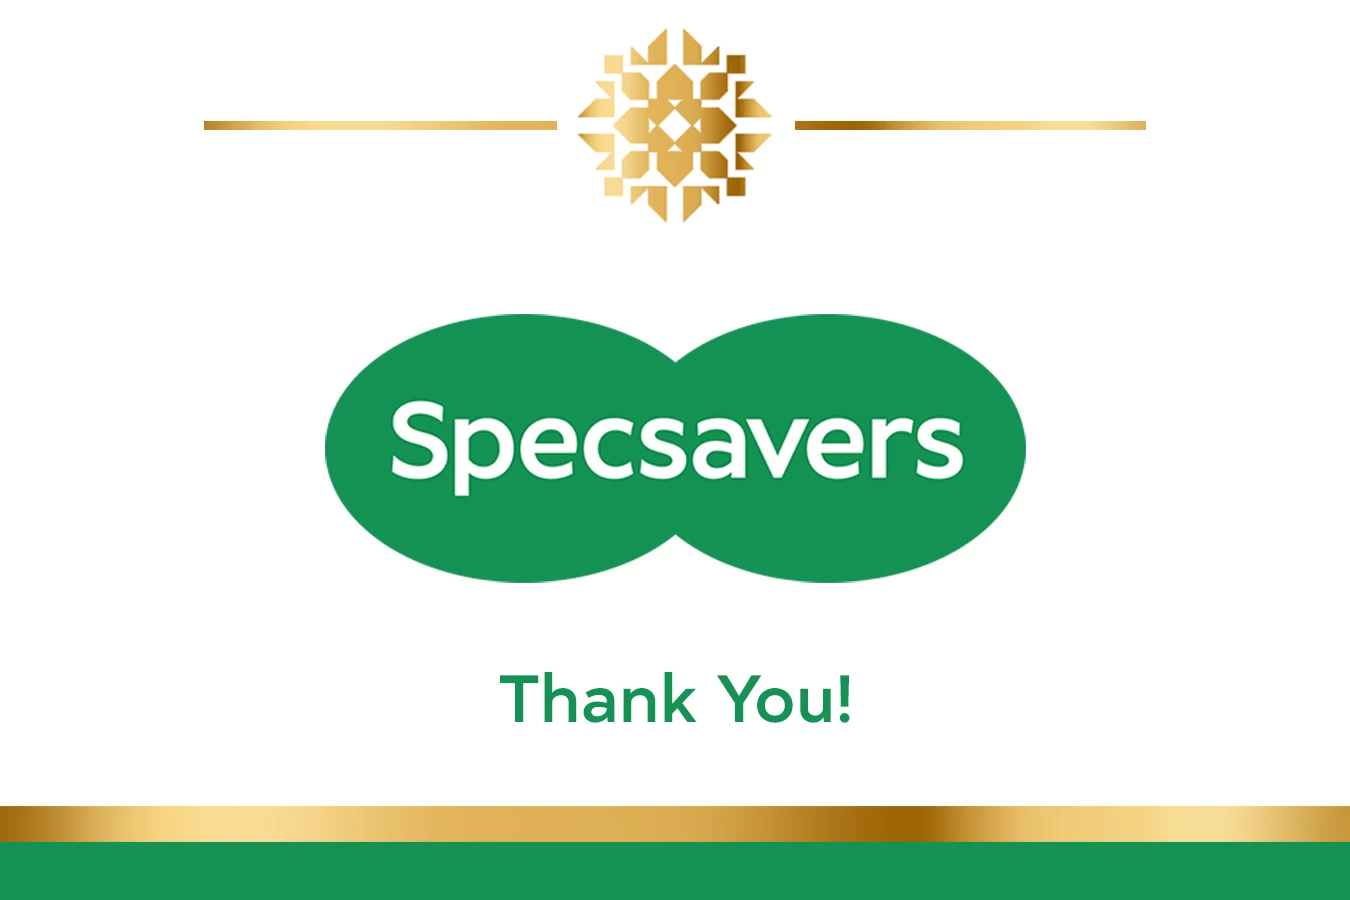 Specsavers Branded Prosecco Label